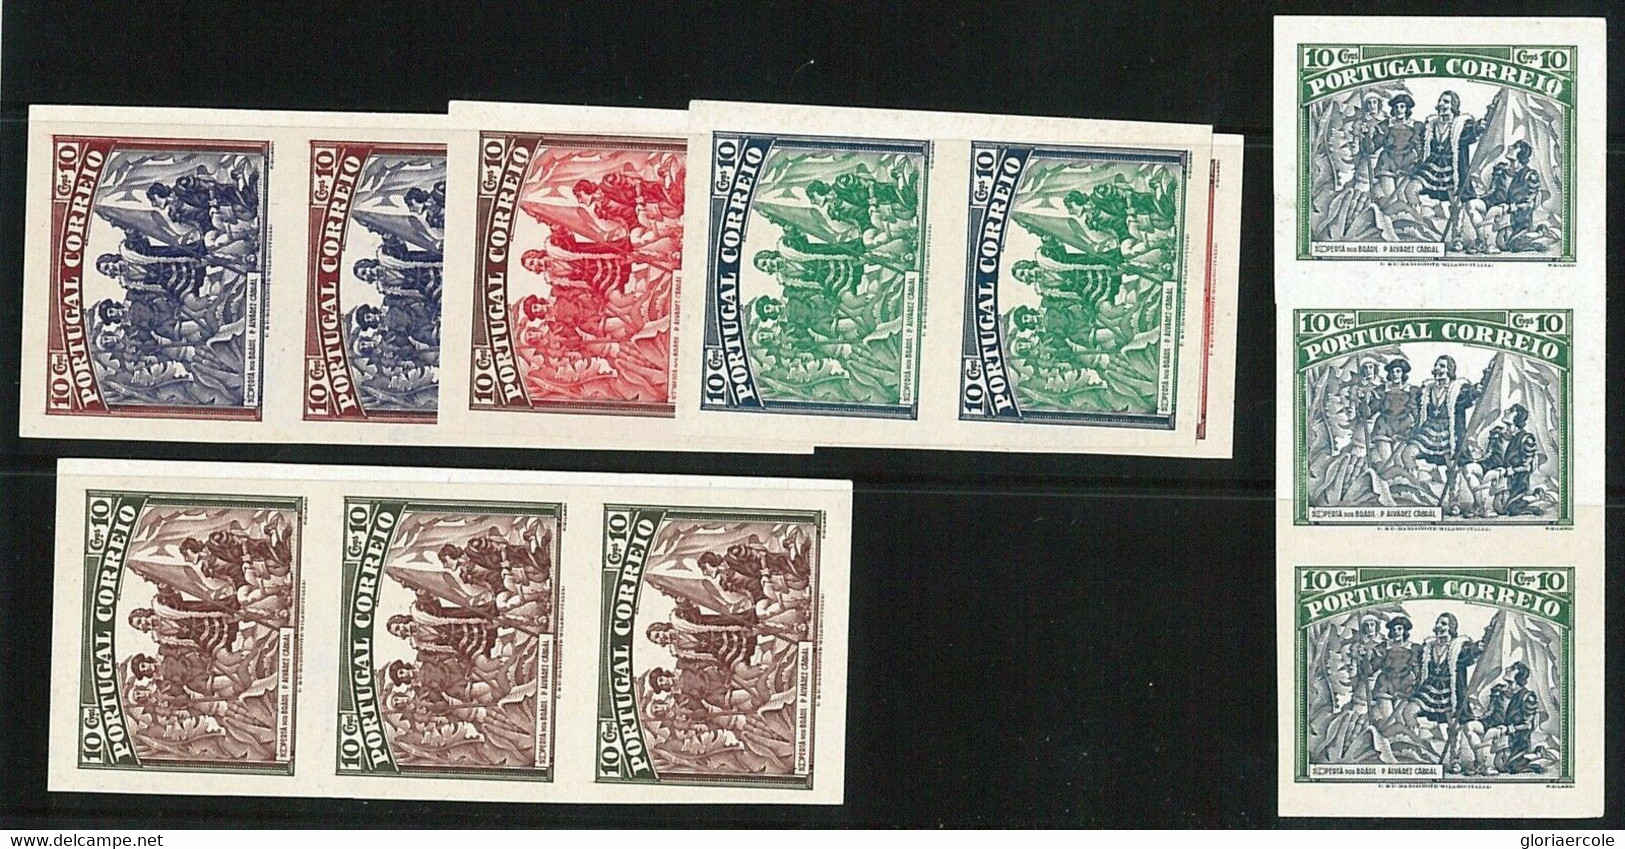 46485 - Cabral PORTUGAL - UNISSUED Never Issued STAMP PROOFS!  VERY INTERESTING! 1940 - Prove E Ristampe